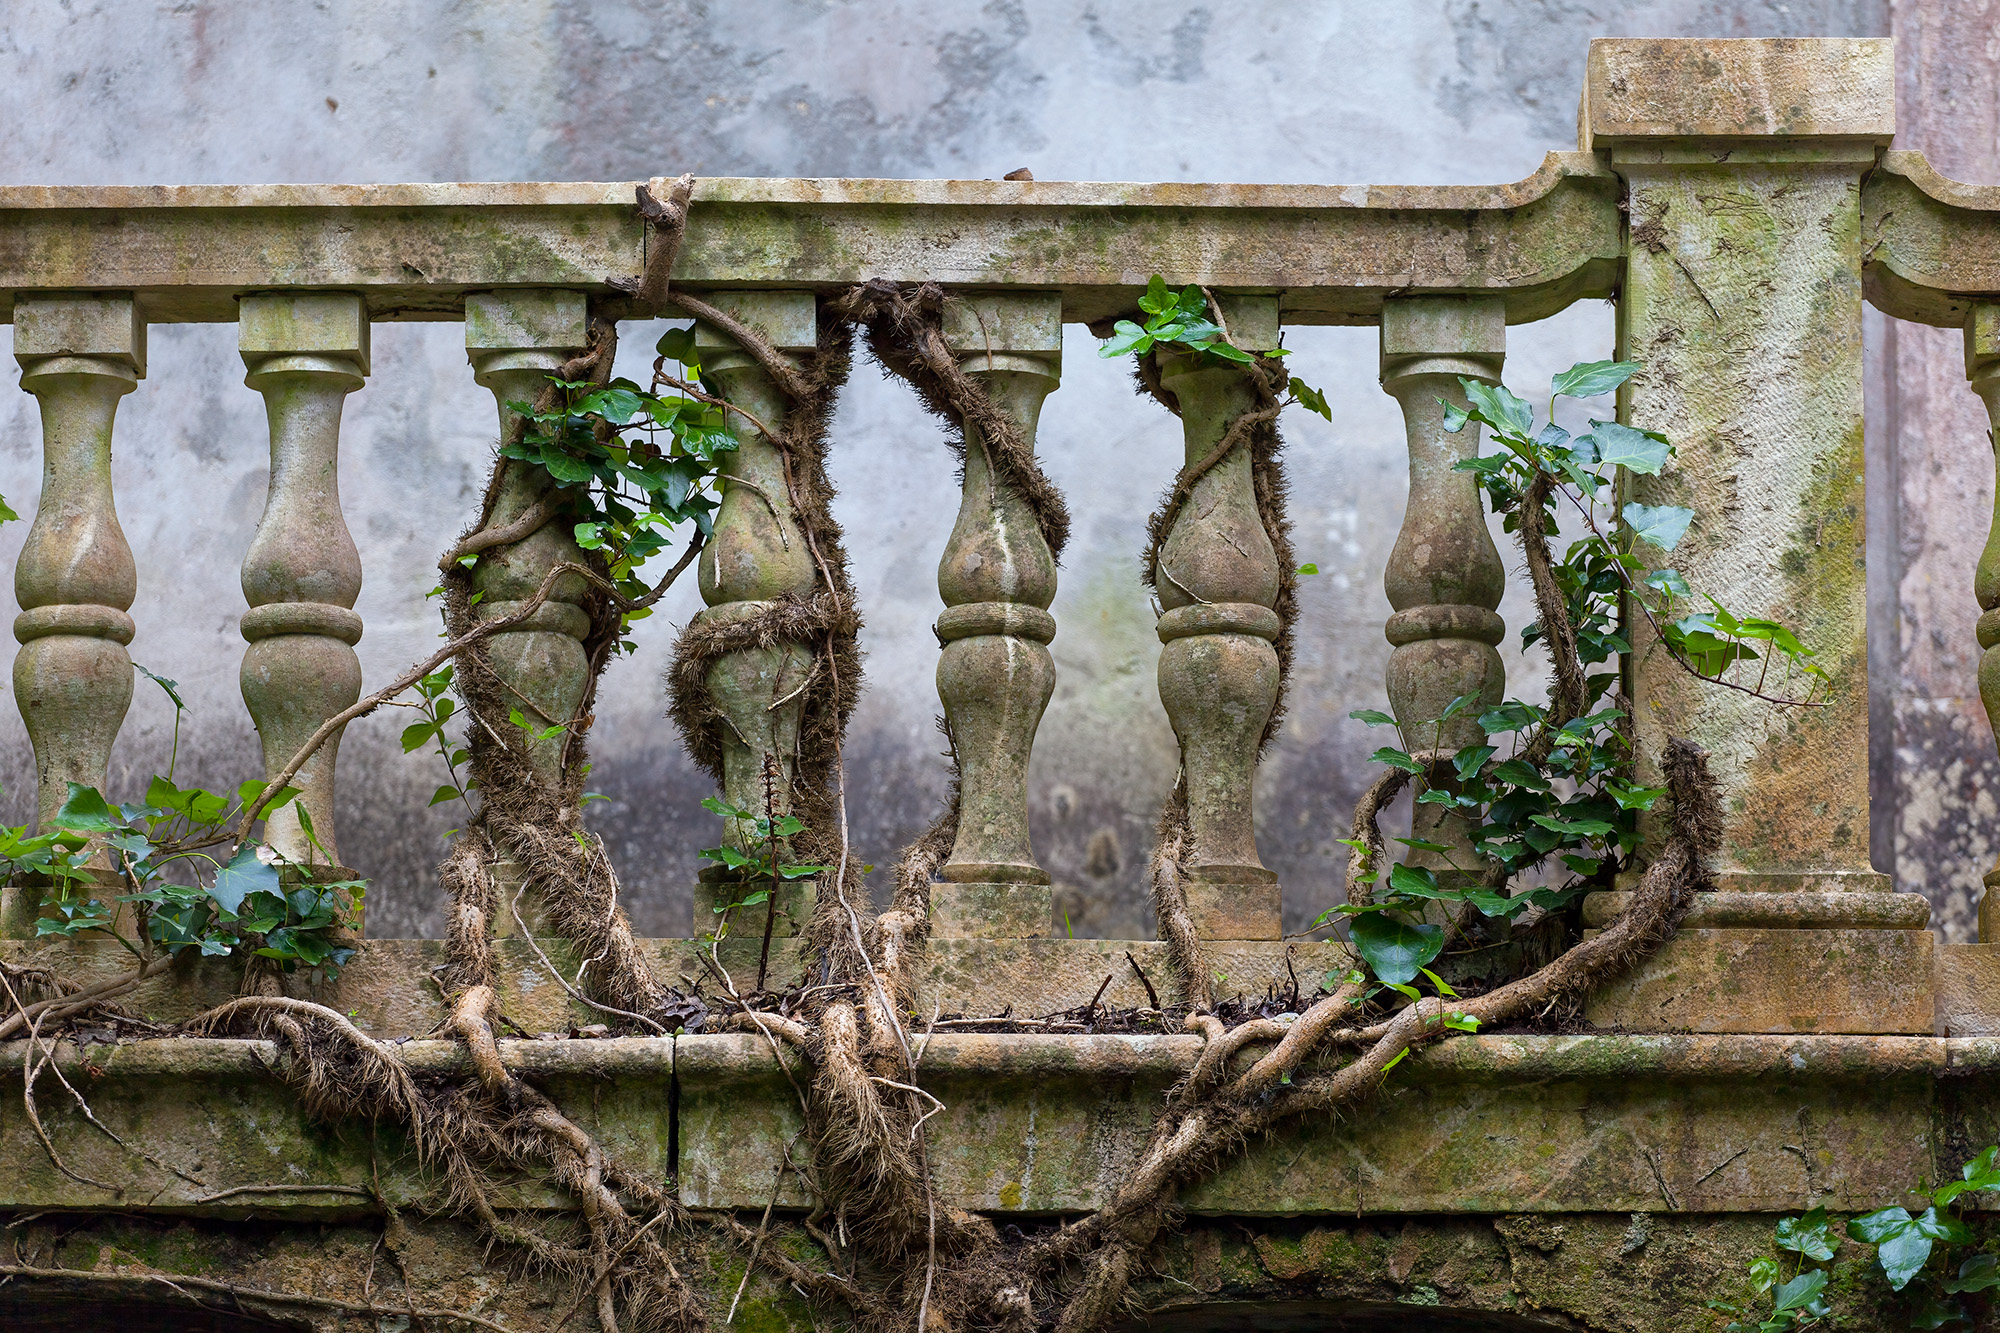 Captured in Sintra, Portugal, "Ancient Vines' Embrace" offers a poetic glimpse into the passage of time. The photograph reveals...